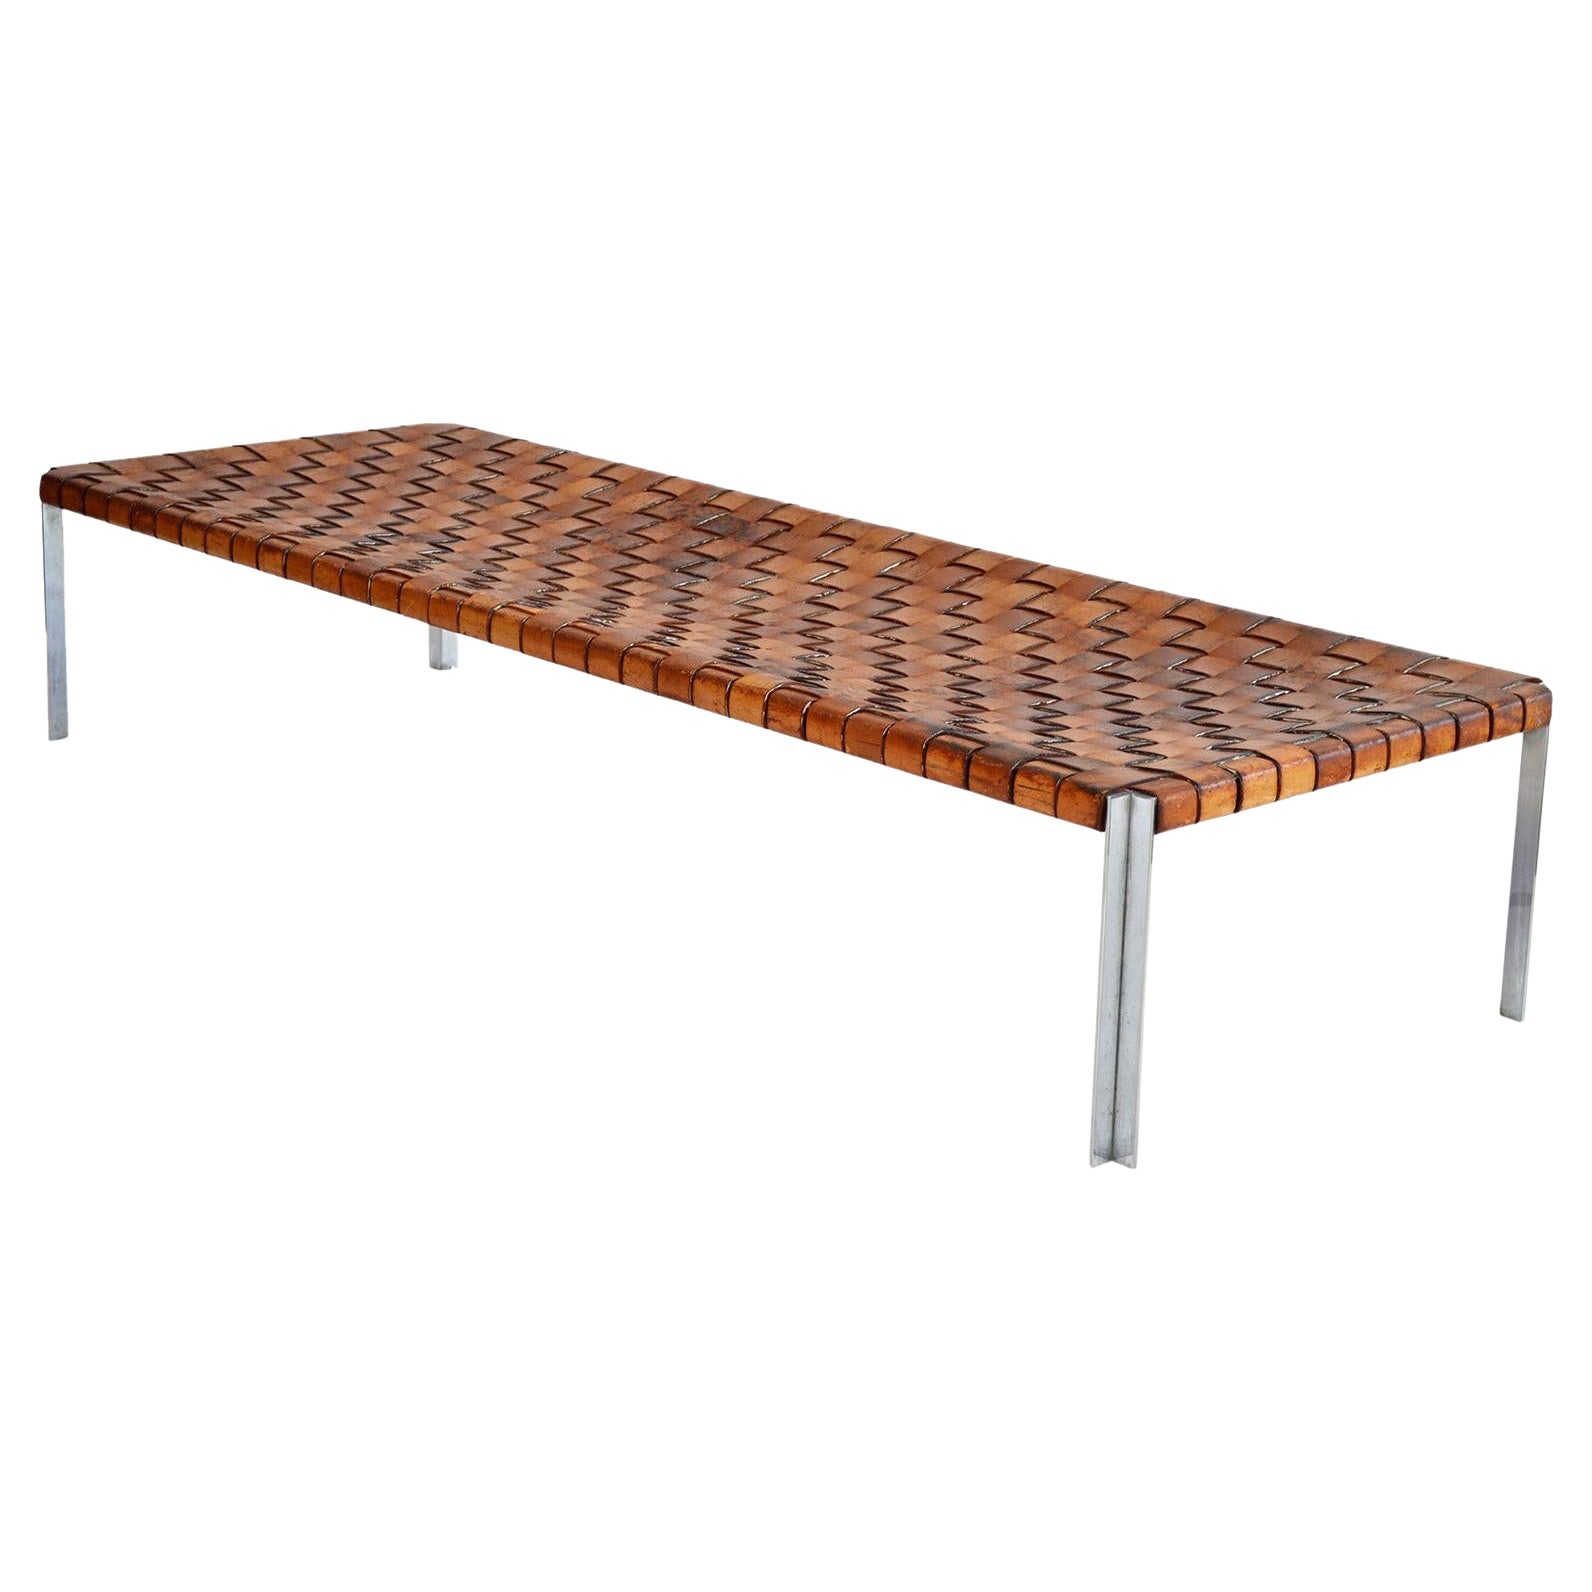 Vintage Woven Leather Long Bench by Katavalos Littell and Kelley Laverne c.1950s For Sale